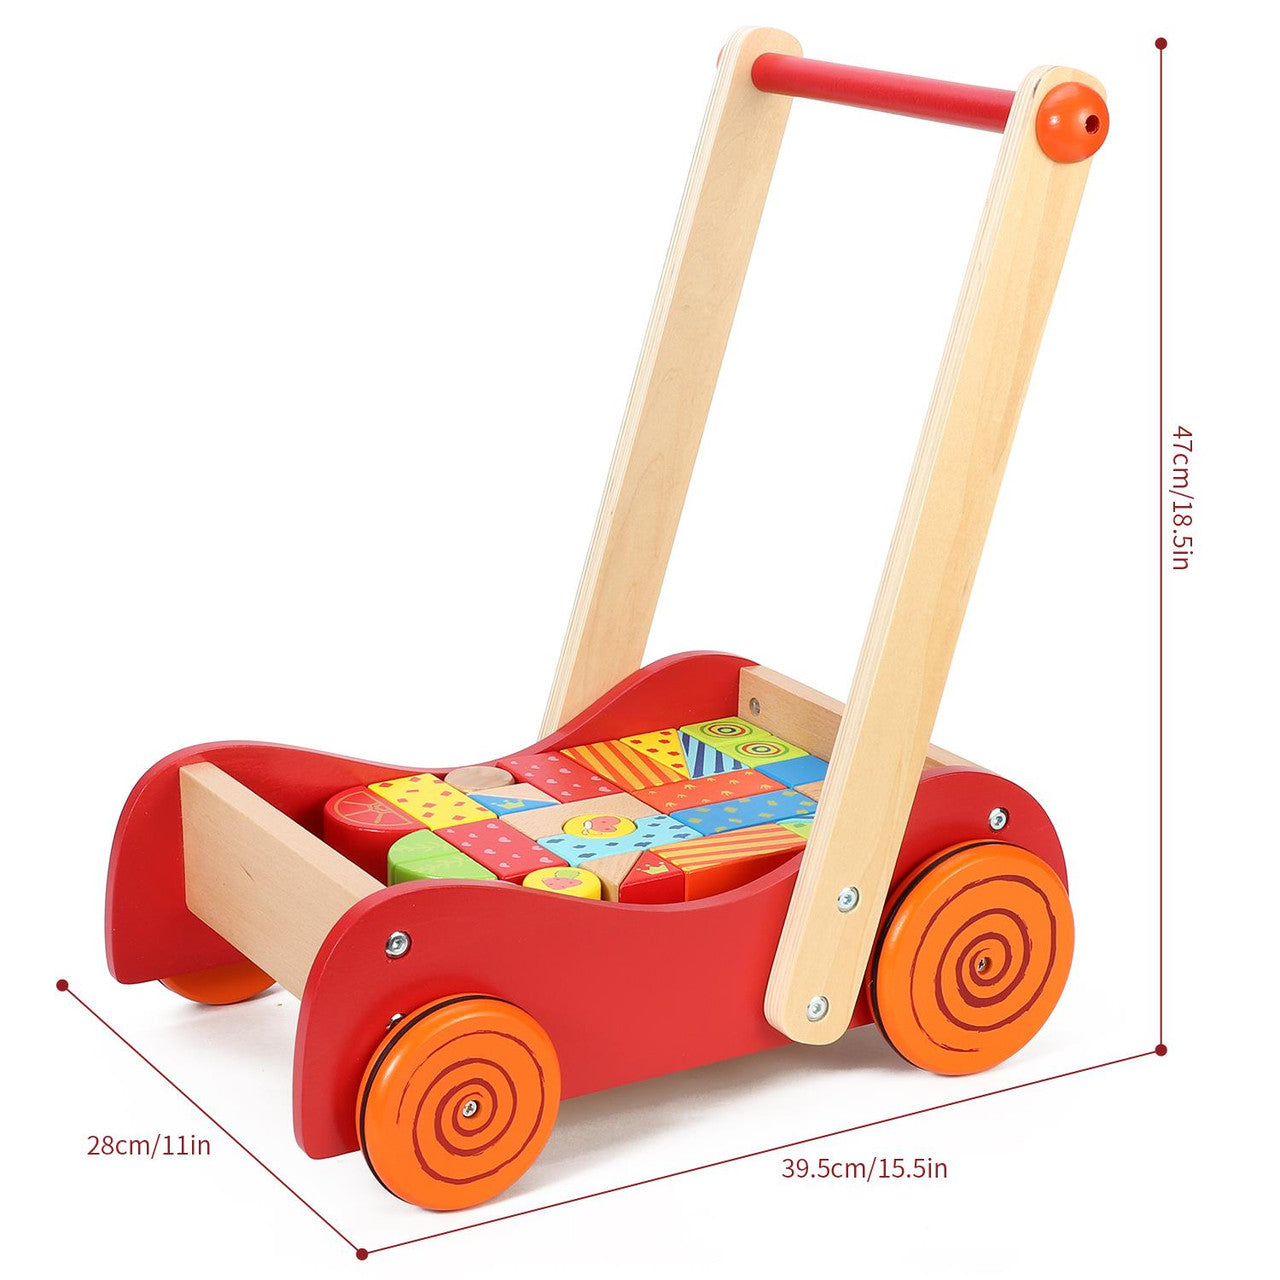 Personalised Wooden Baby Walkie Walkie Walker With Wooden Building Blocks For Toddlers - Babba box